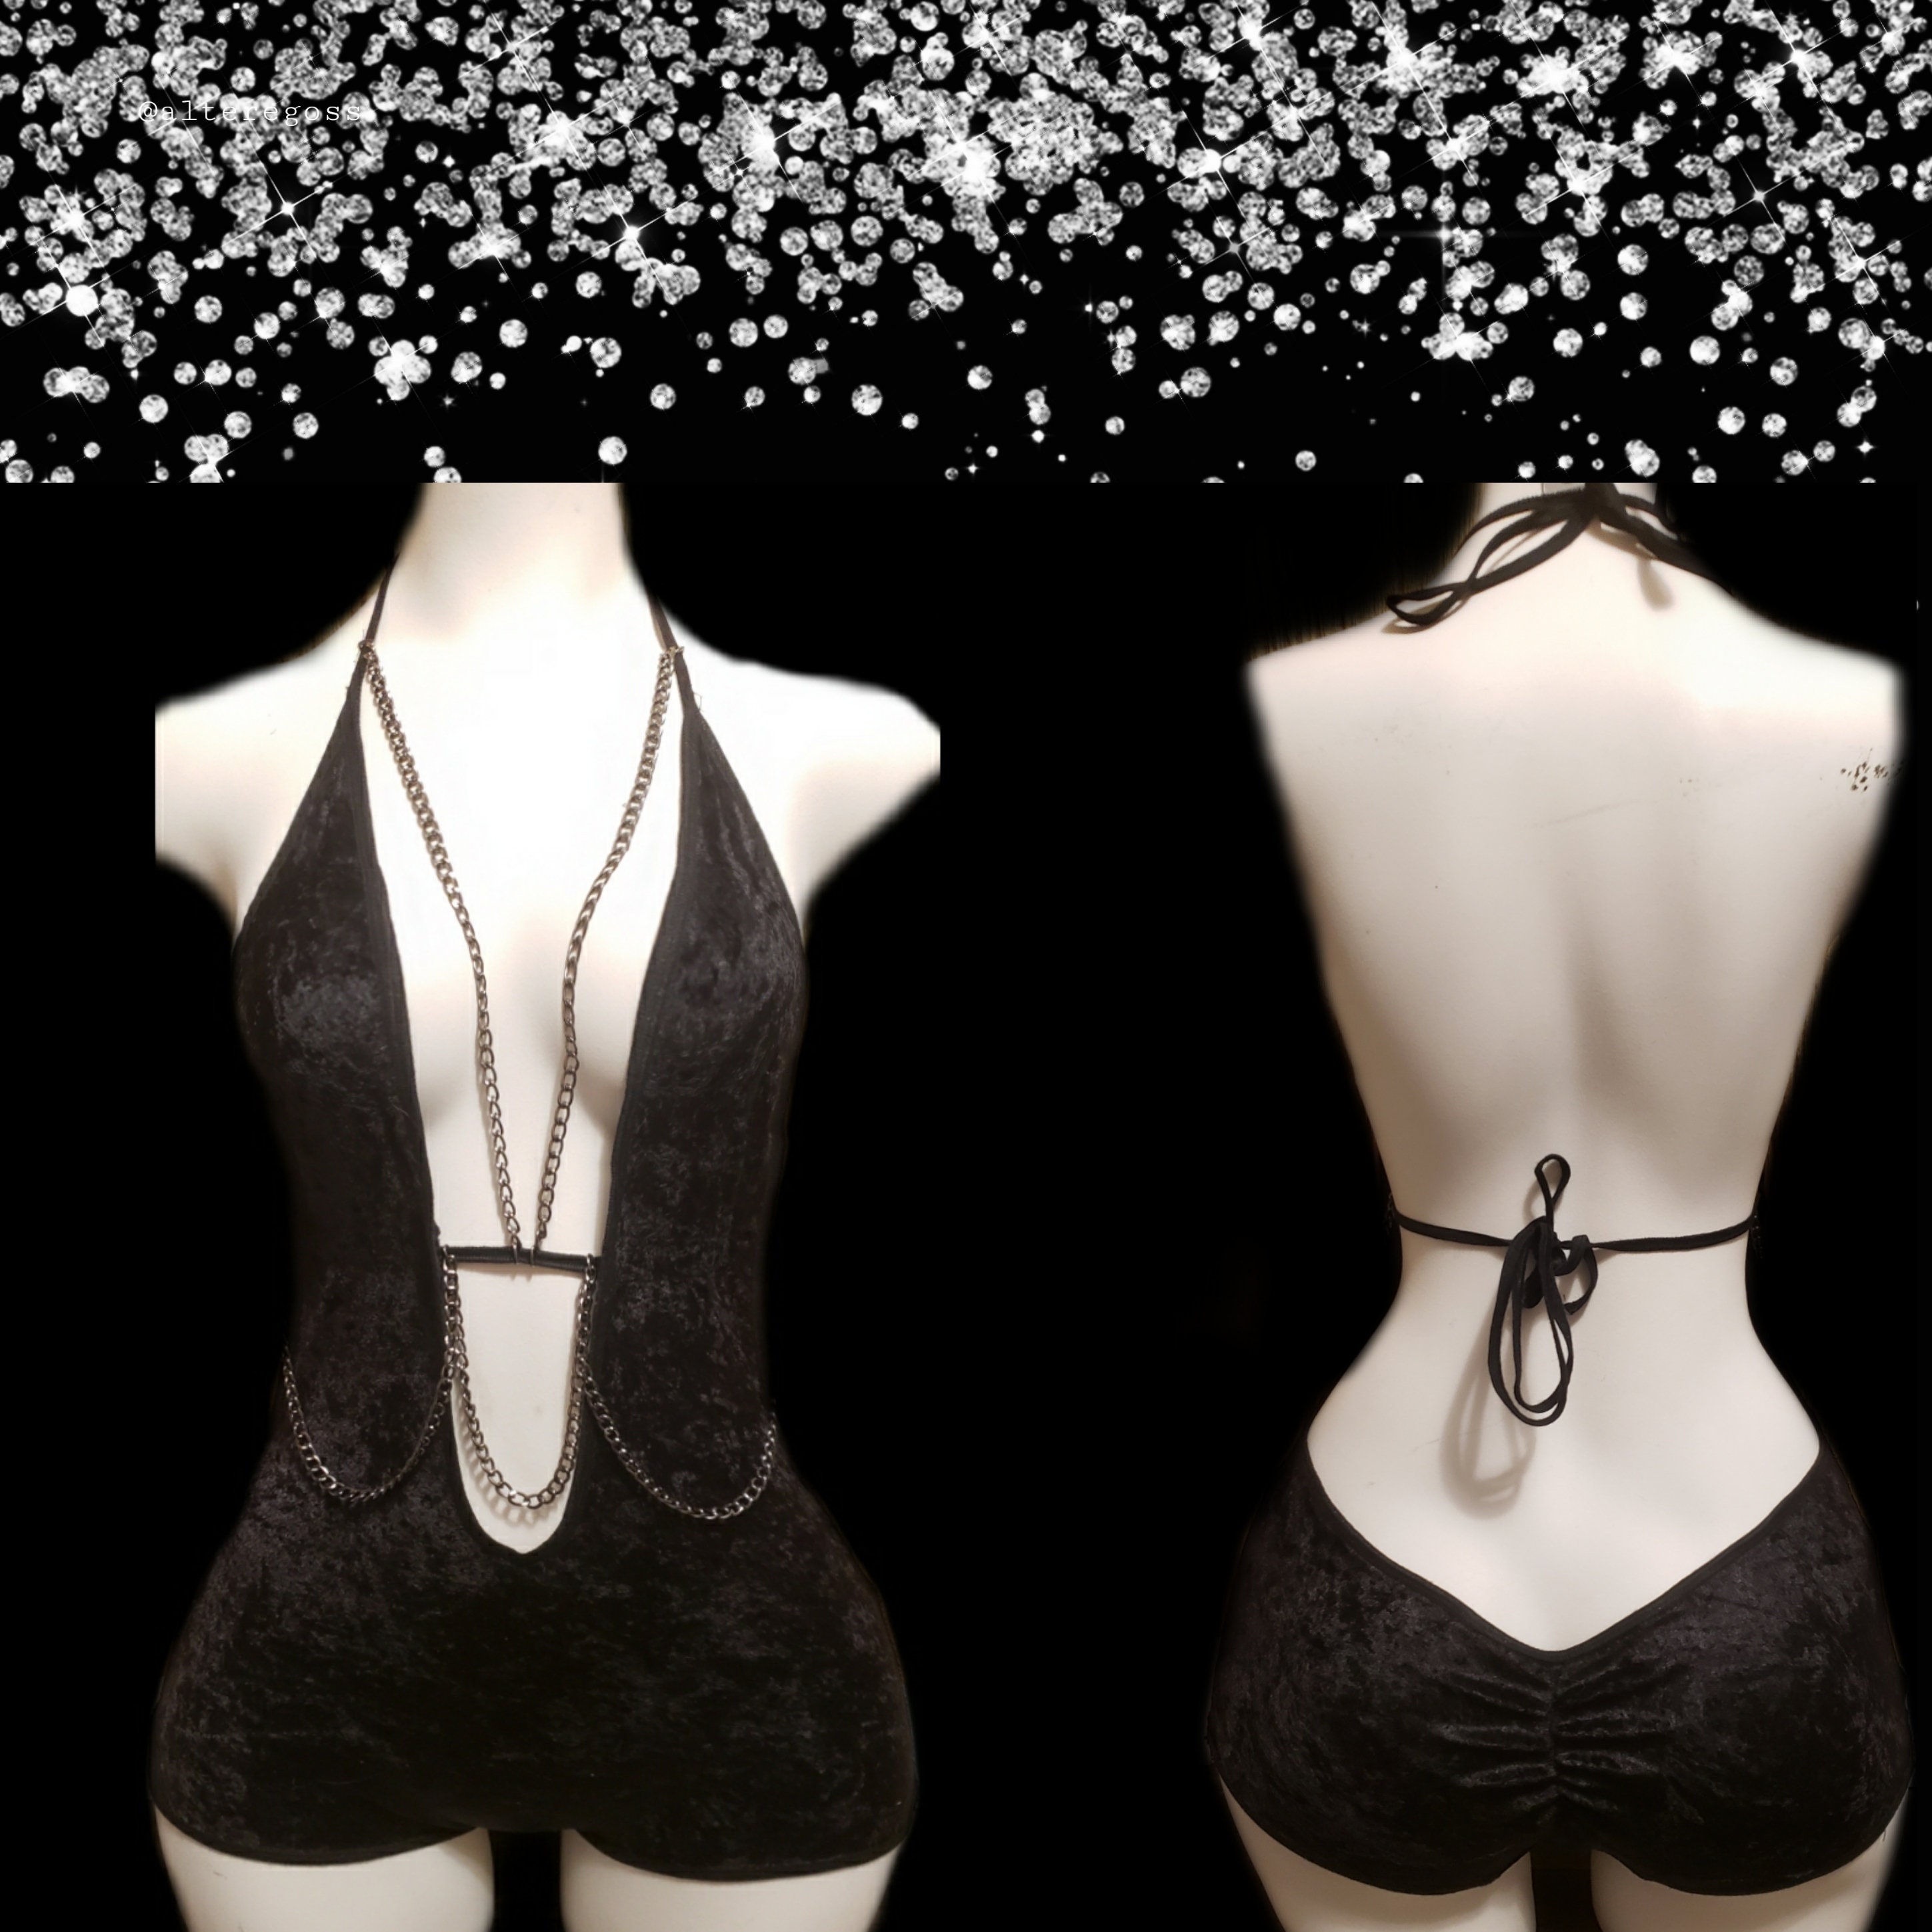 Sexy High Cut Bodysuit Gothic Buckle Tape Skinny Cosplay Lingerie